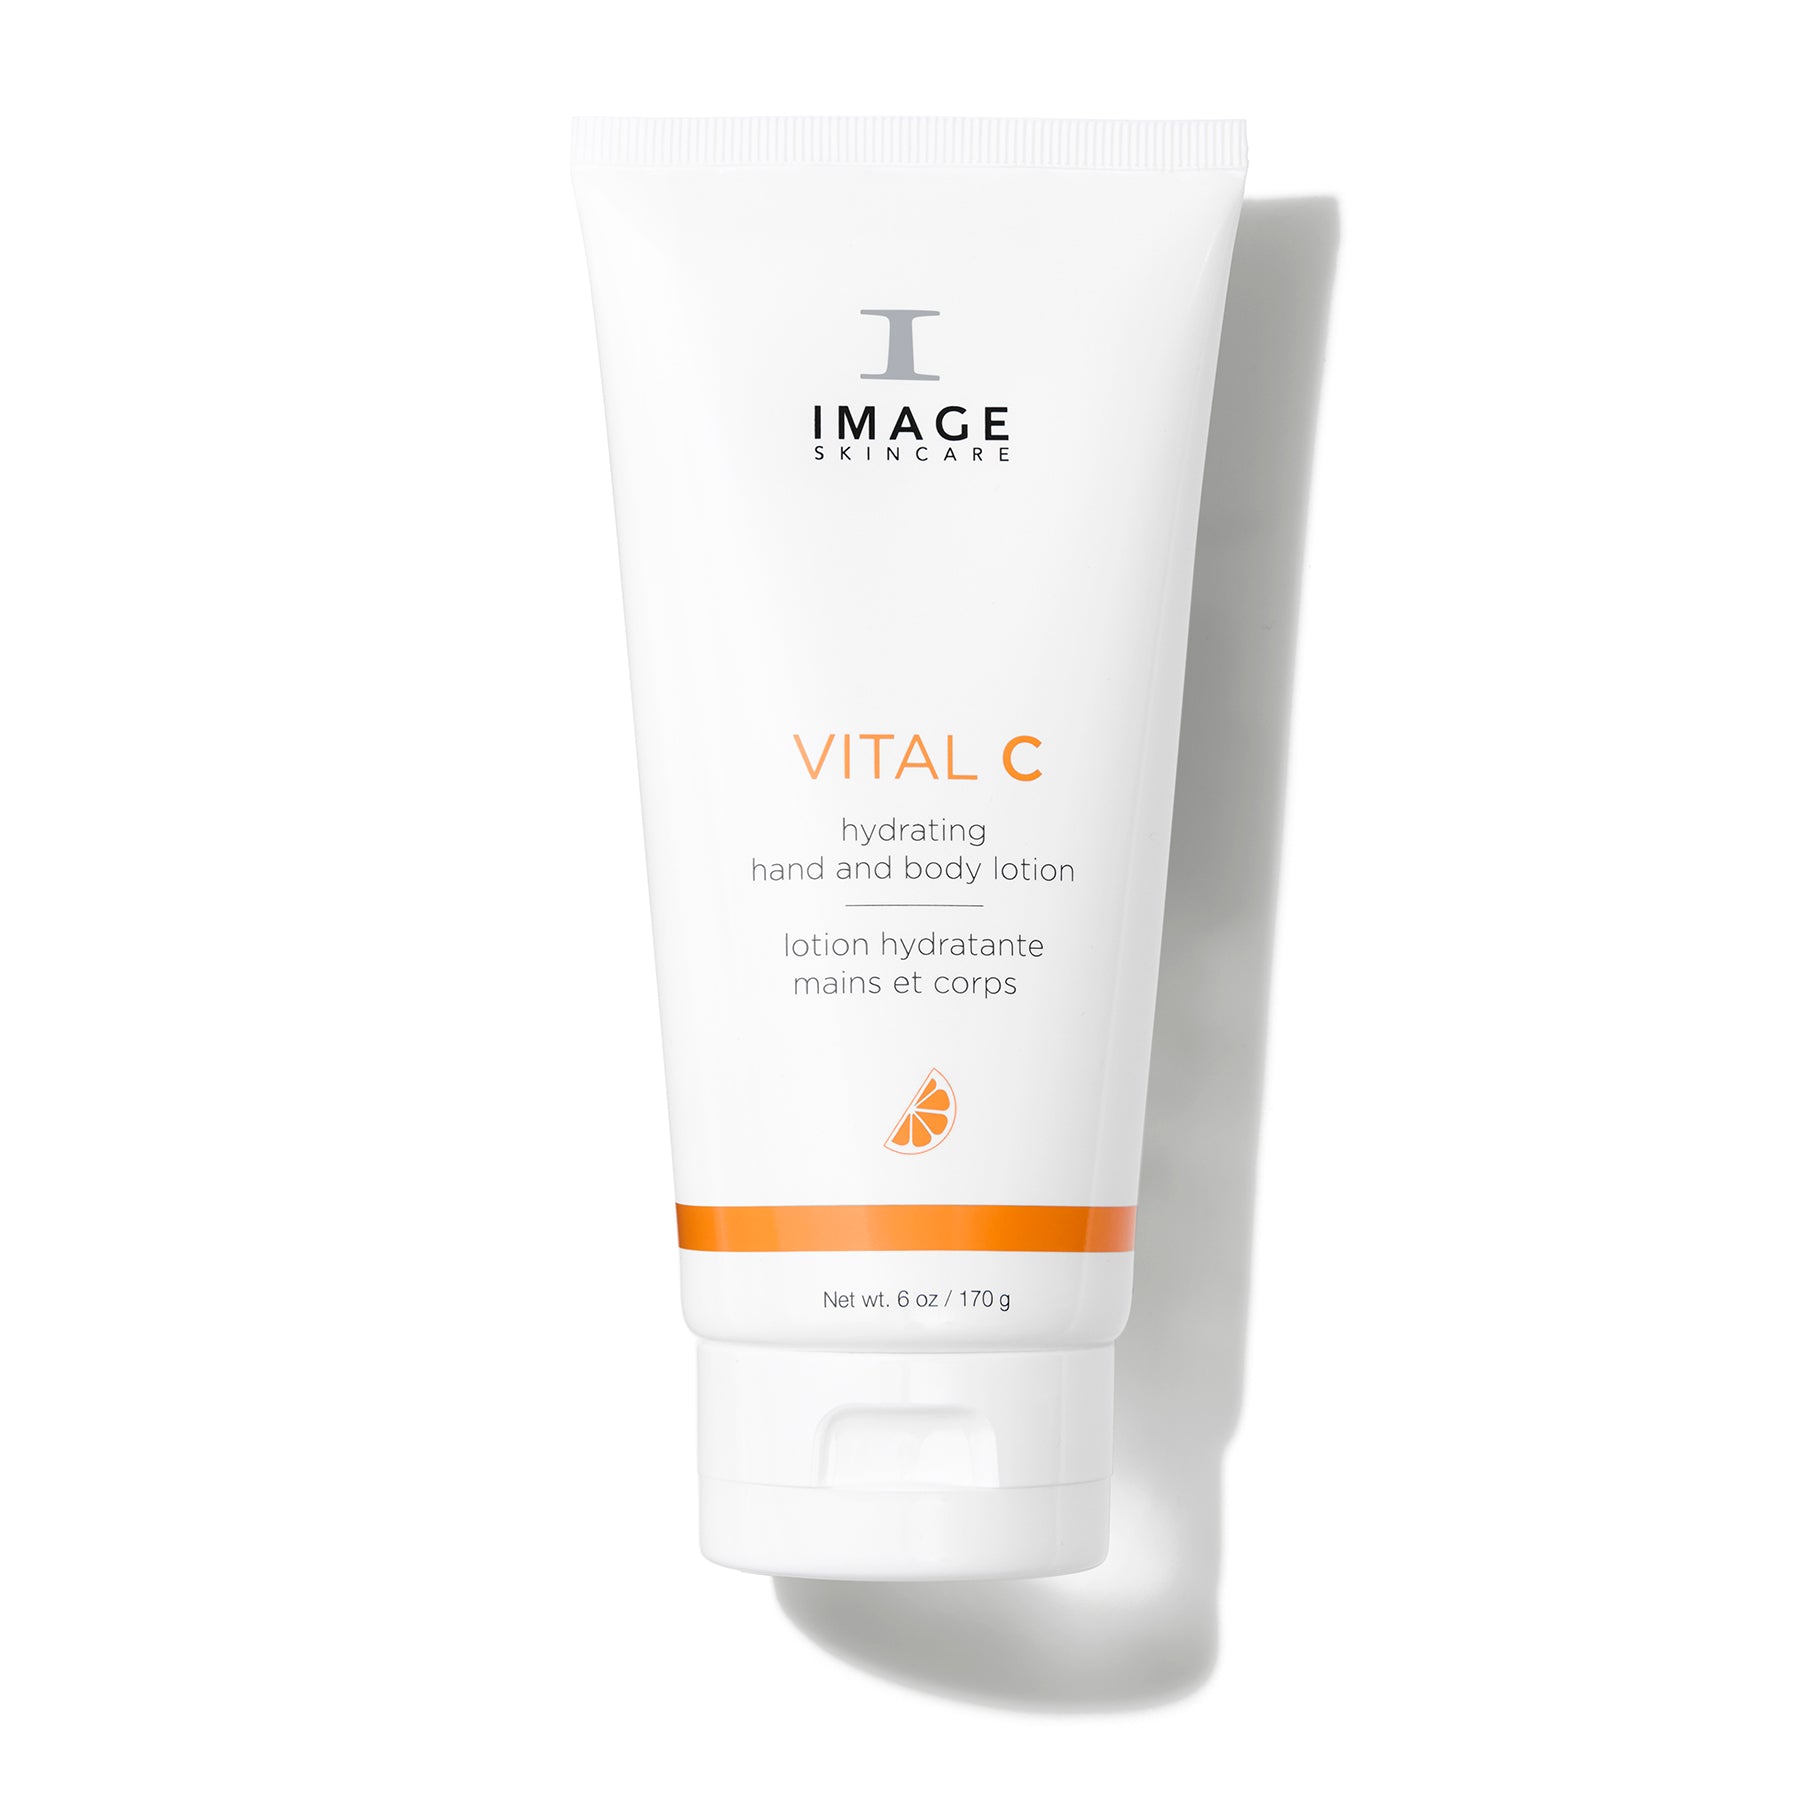 Image Skincare Vital C Hand and Body Lotion Shop At Exclusive Beauty